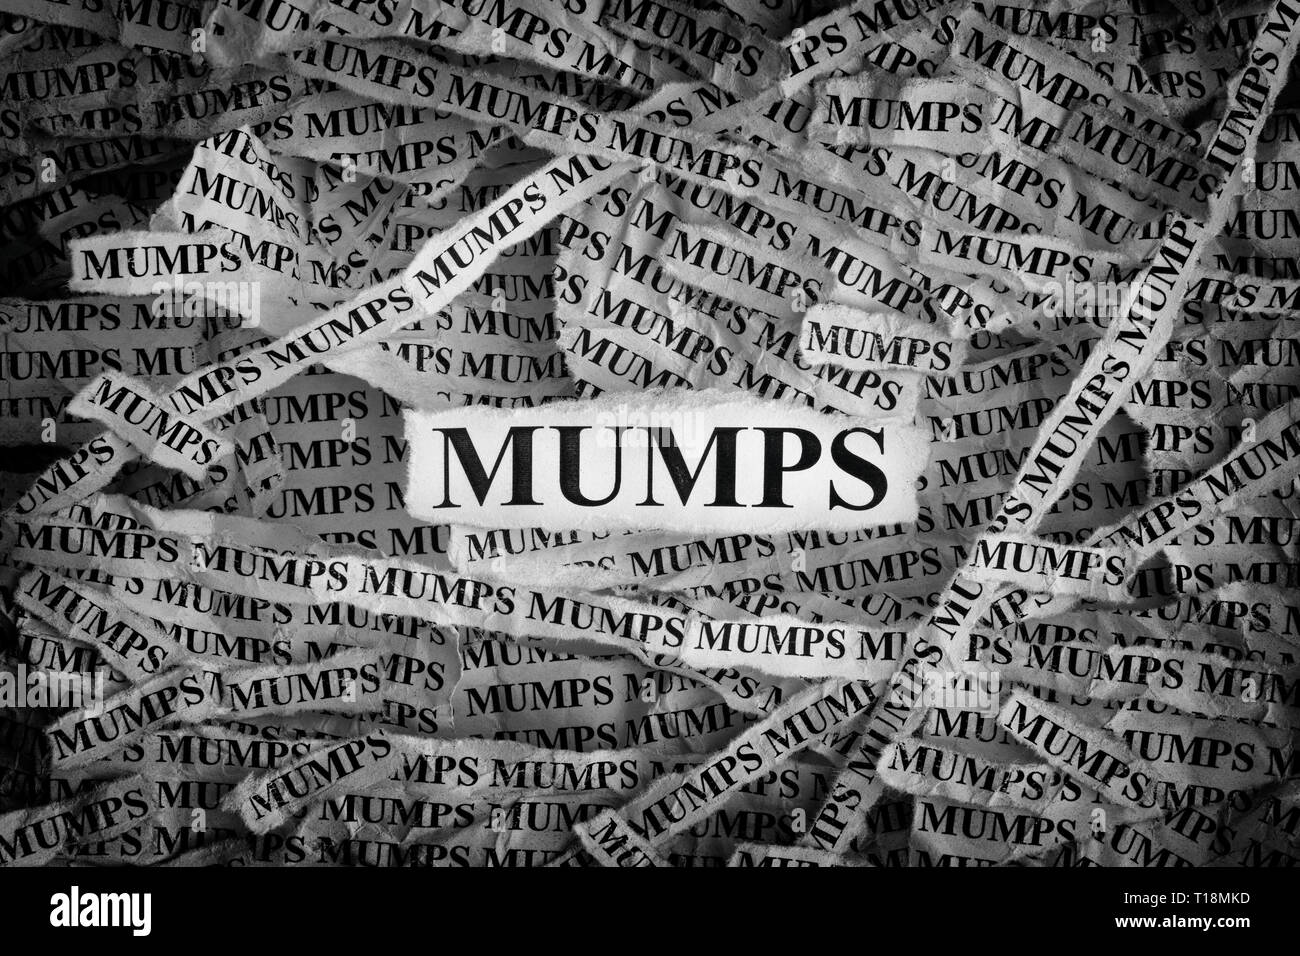 Mumps. Torn pieces of paper with the words Mumps. Concept image. Black and White. Close up. Stock Photo